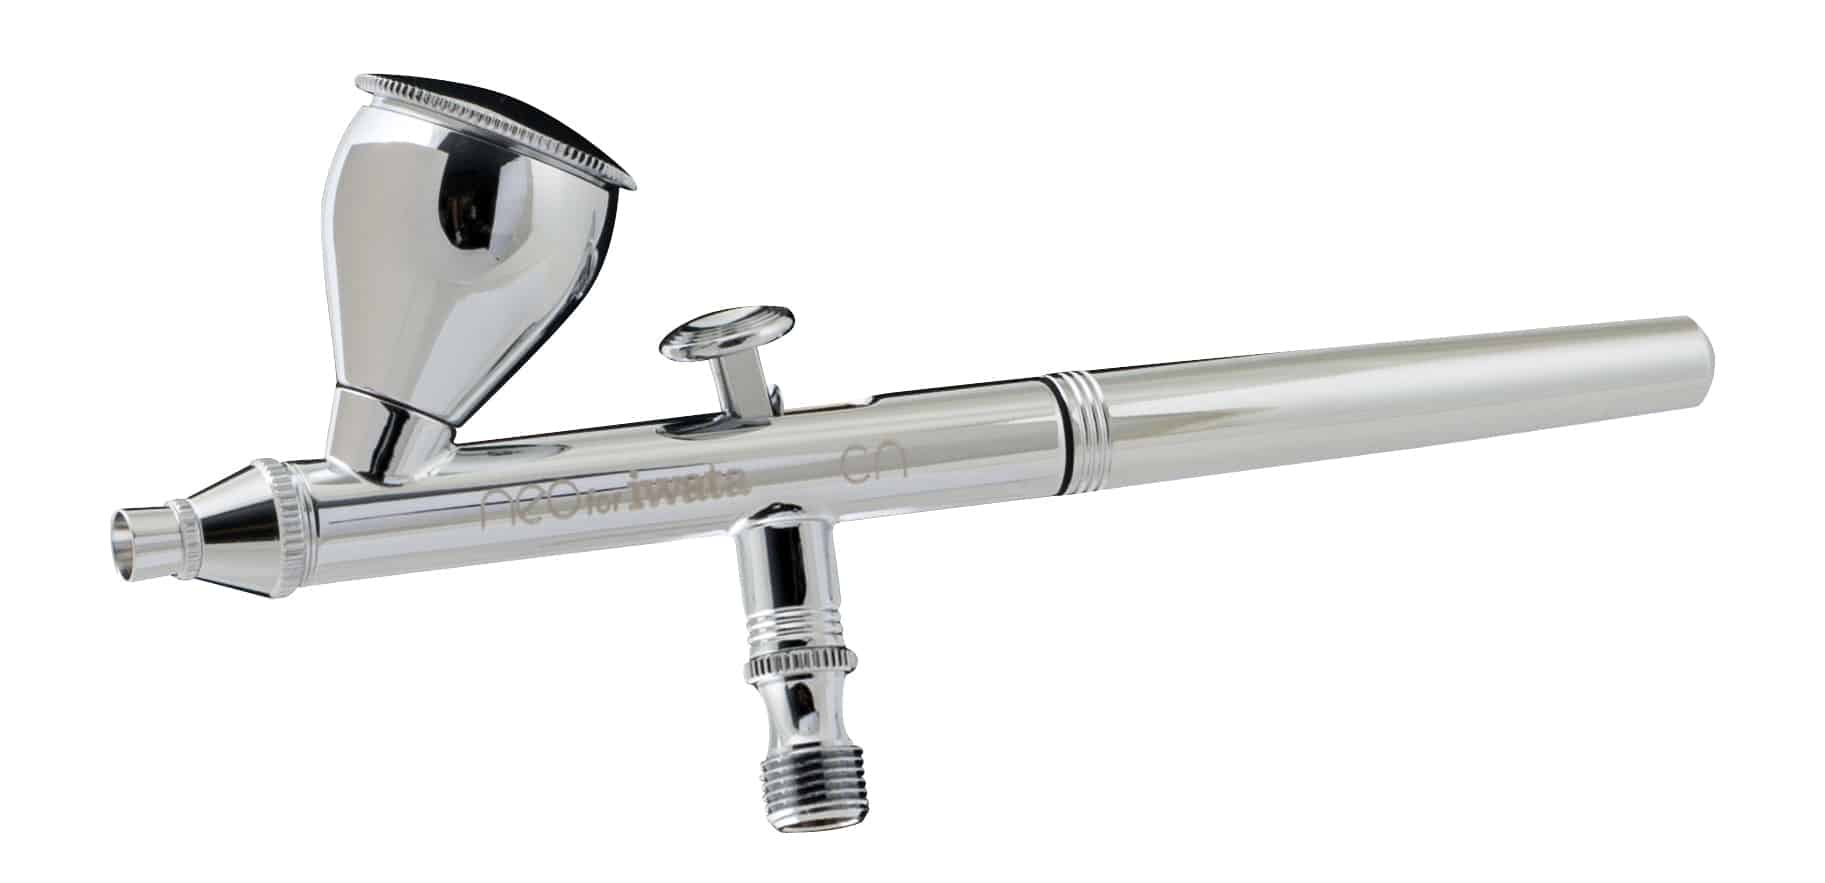 The BEST AIRBRUSH for Beginners? 